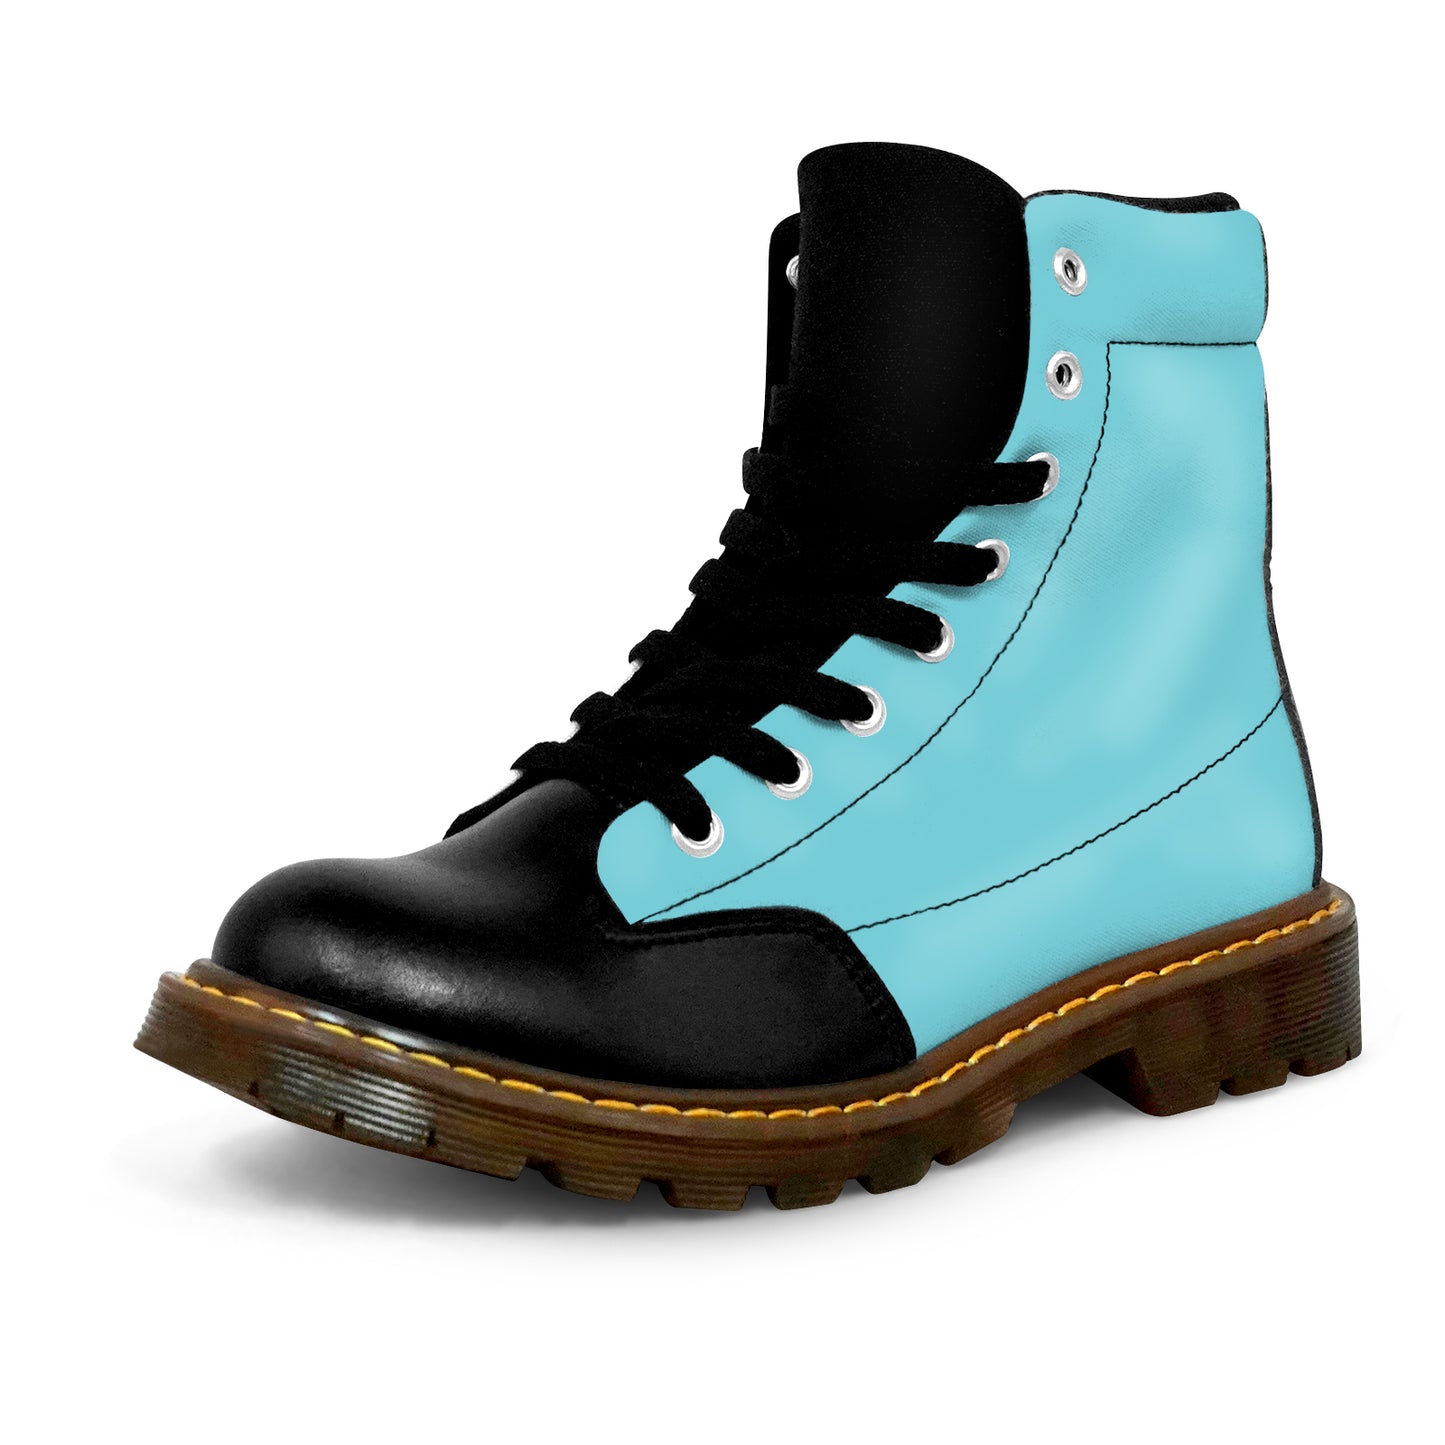 Winter Round Toe Women's Boots - Turquoise